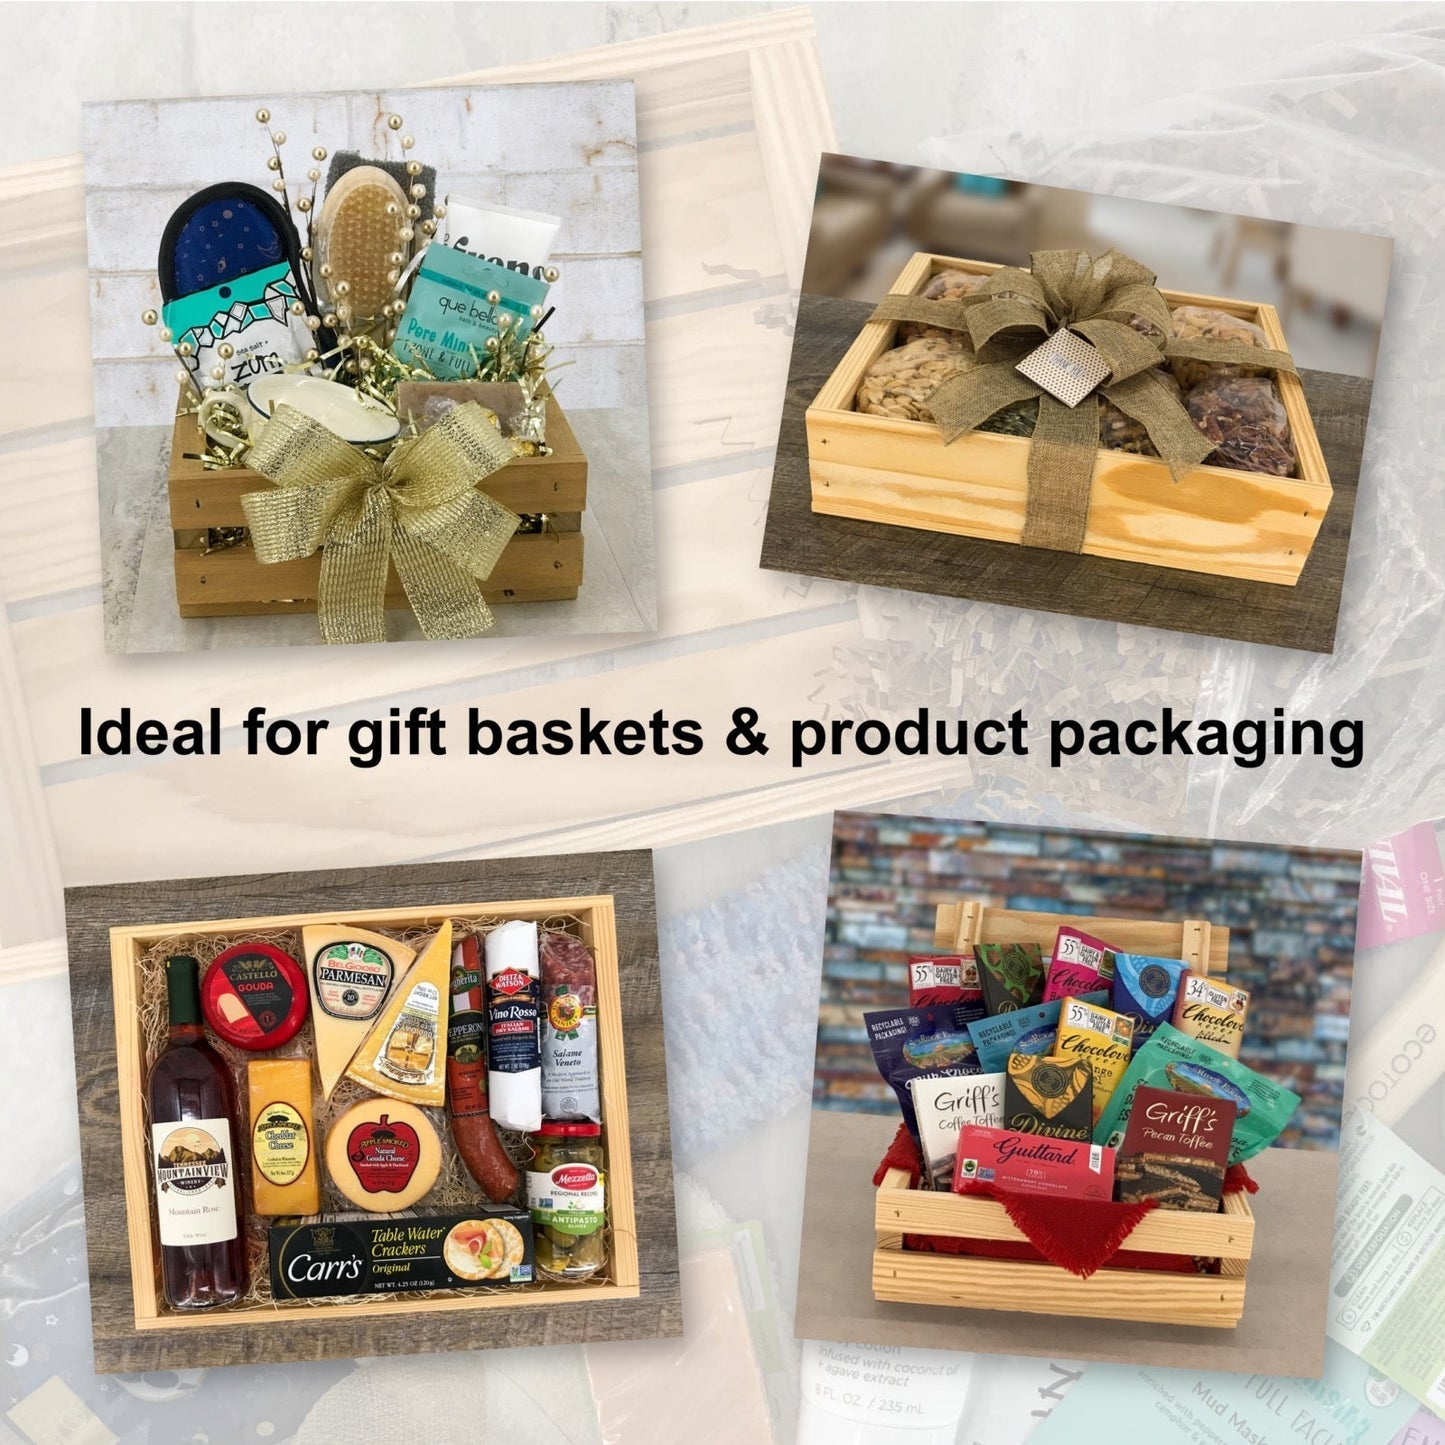 Ideal for gift baskets and product packaging, S2-7.125-5.5-3.5-ST-NW-NL, 6-S2-7.125-5.5-3.5-ST-NW-NL, 12-S2-7.125-5.5-3.5-ST-NW-NL, 24-S2-7.125-5.5-3.5-ST-NW-NL, 48-S2-7.125-5.5-3.5-ST-NW-NL, 96-S2-7.125-5.5-3.5-ST-NW-NL,